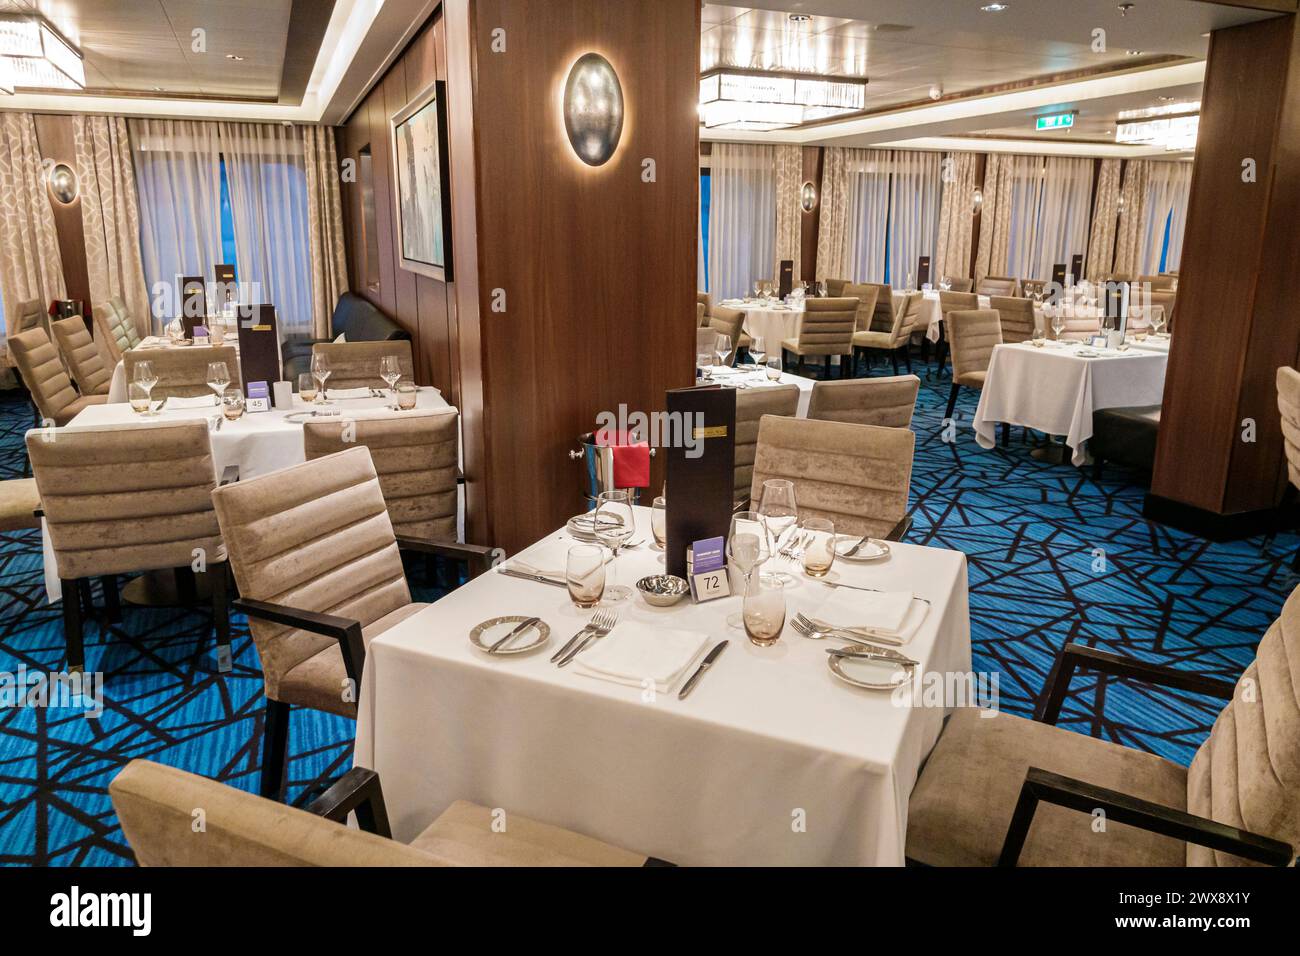 Miami Florida,PortMiami Port of Miami,onboard inside interior,Norwegian Joy Cruise Line ship,7-day Caribbean,Cagney's Steakhouse,dining room,chairs ta Stock Photo